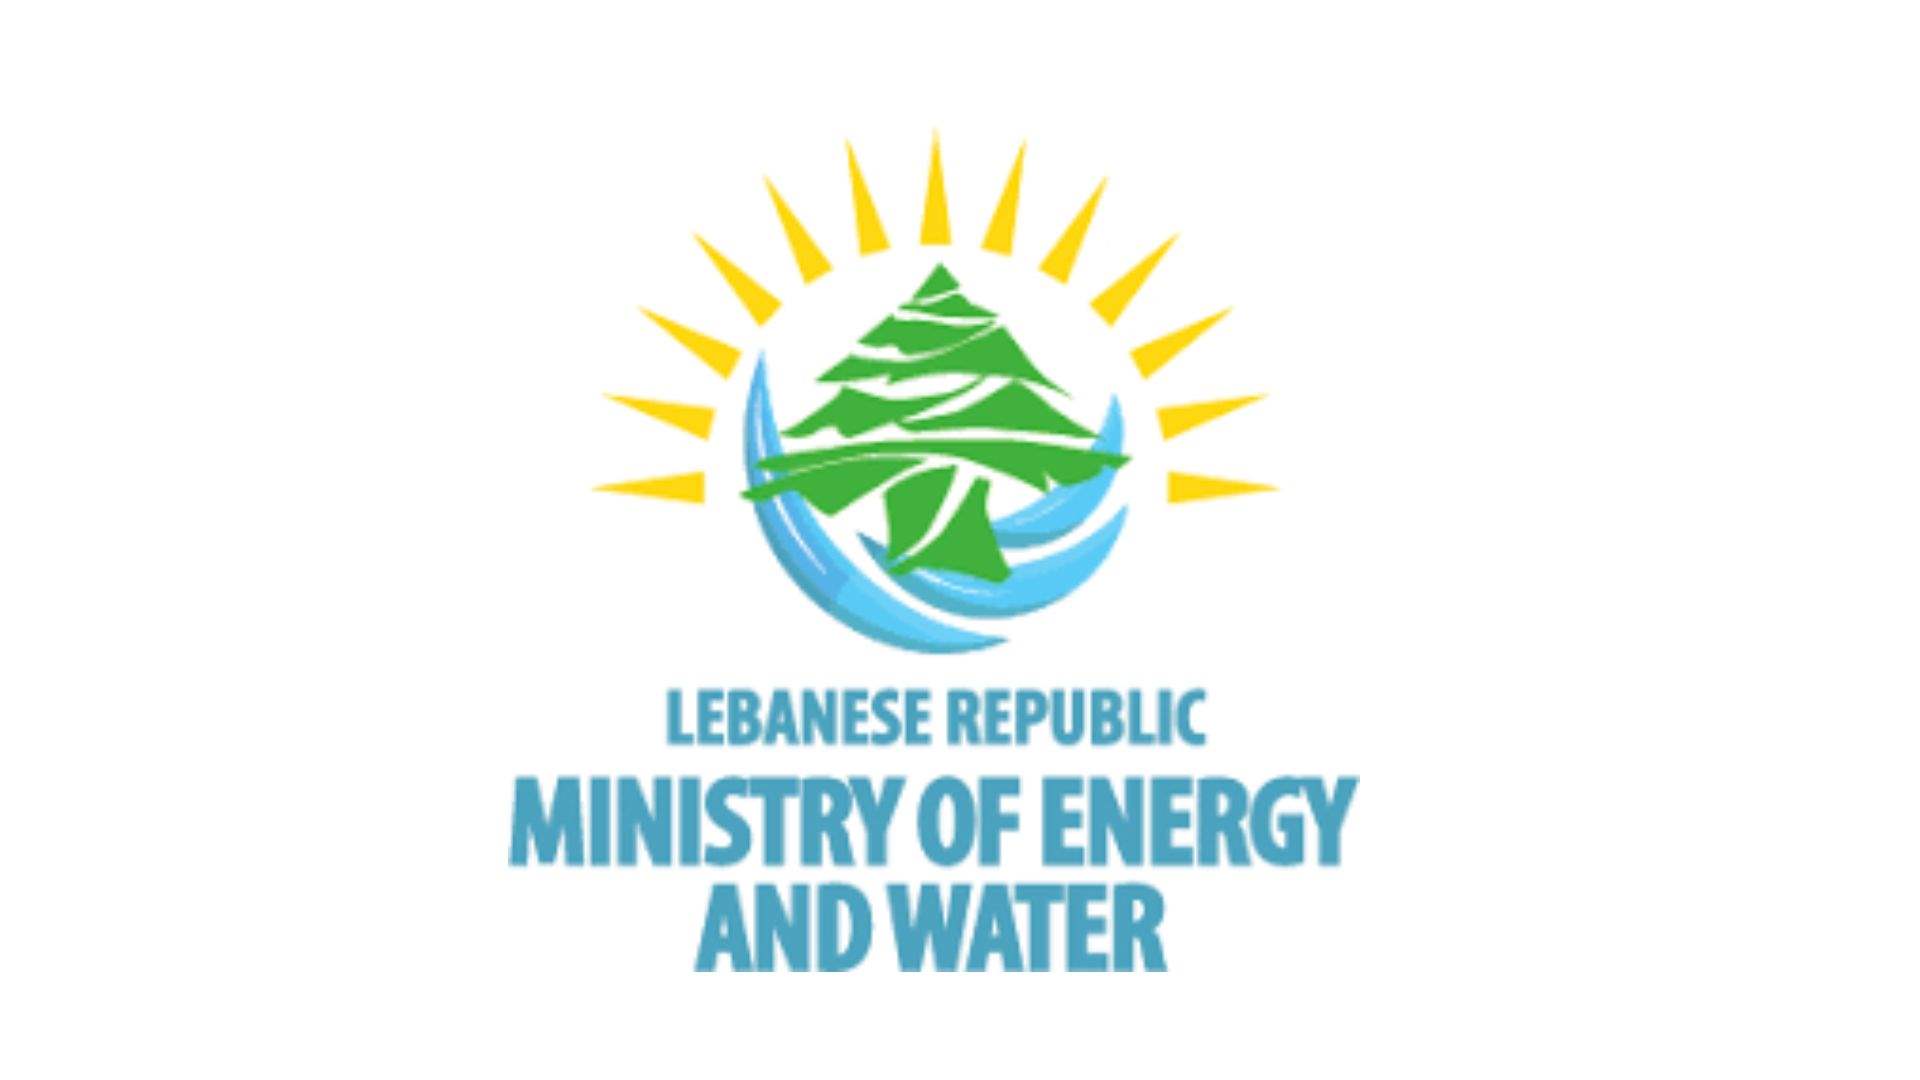 MoE extends membership applications to the electricity sector regulatory authority until August 31, 2023